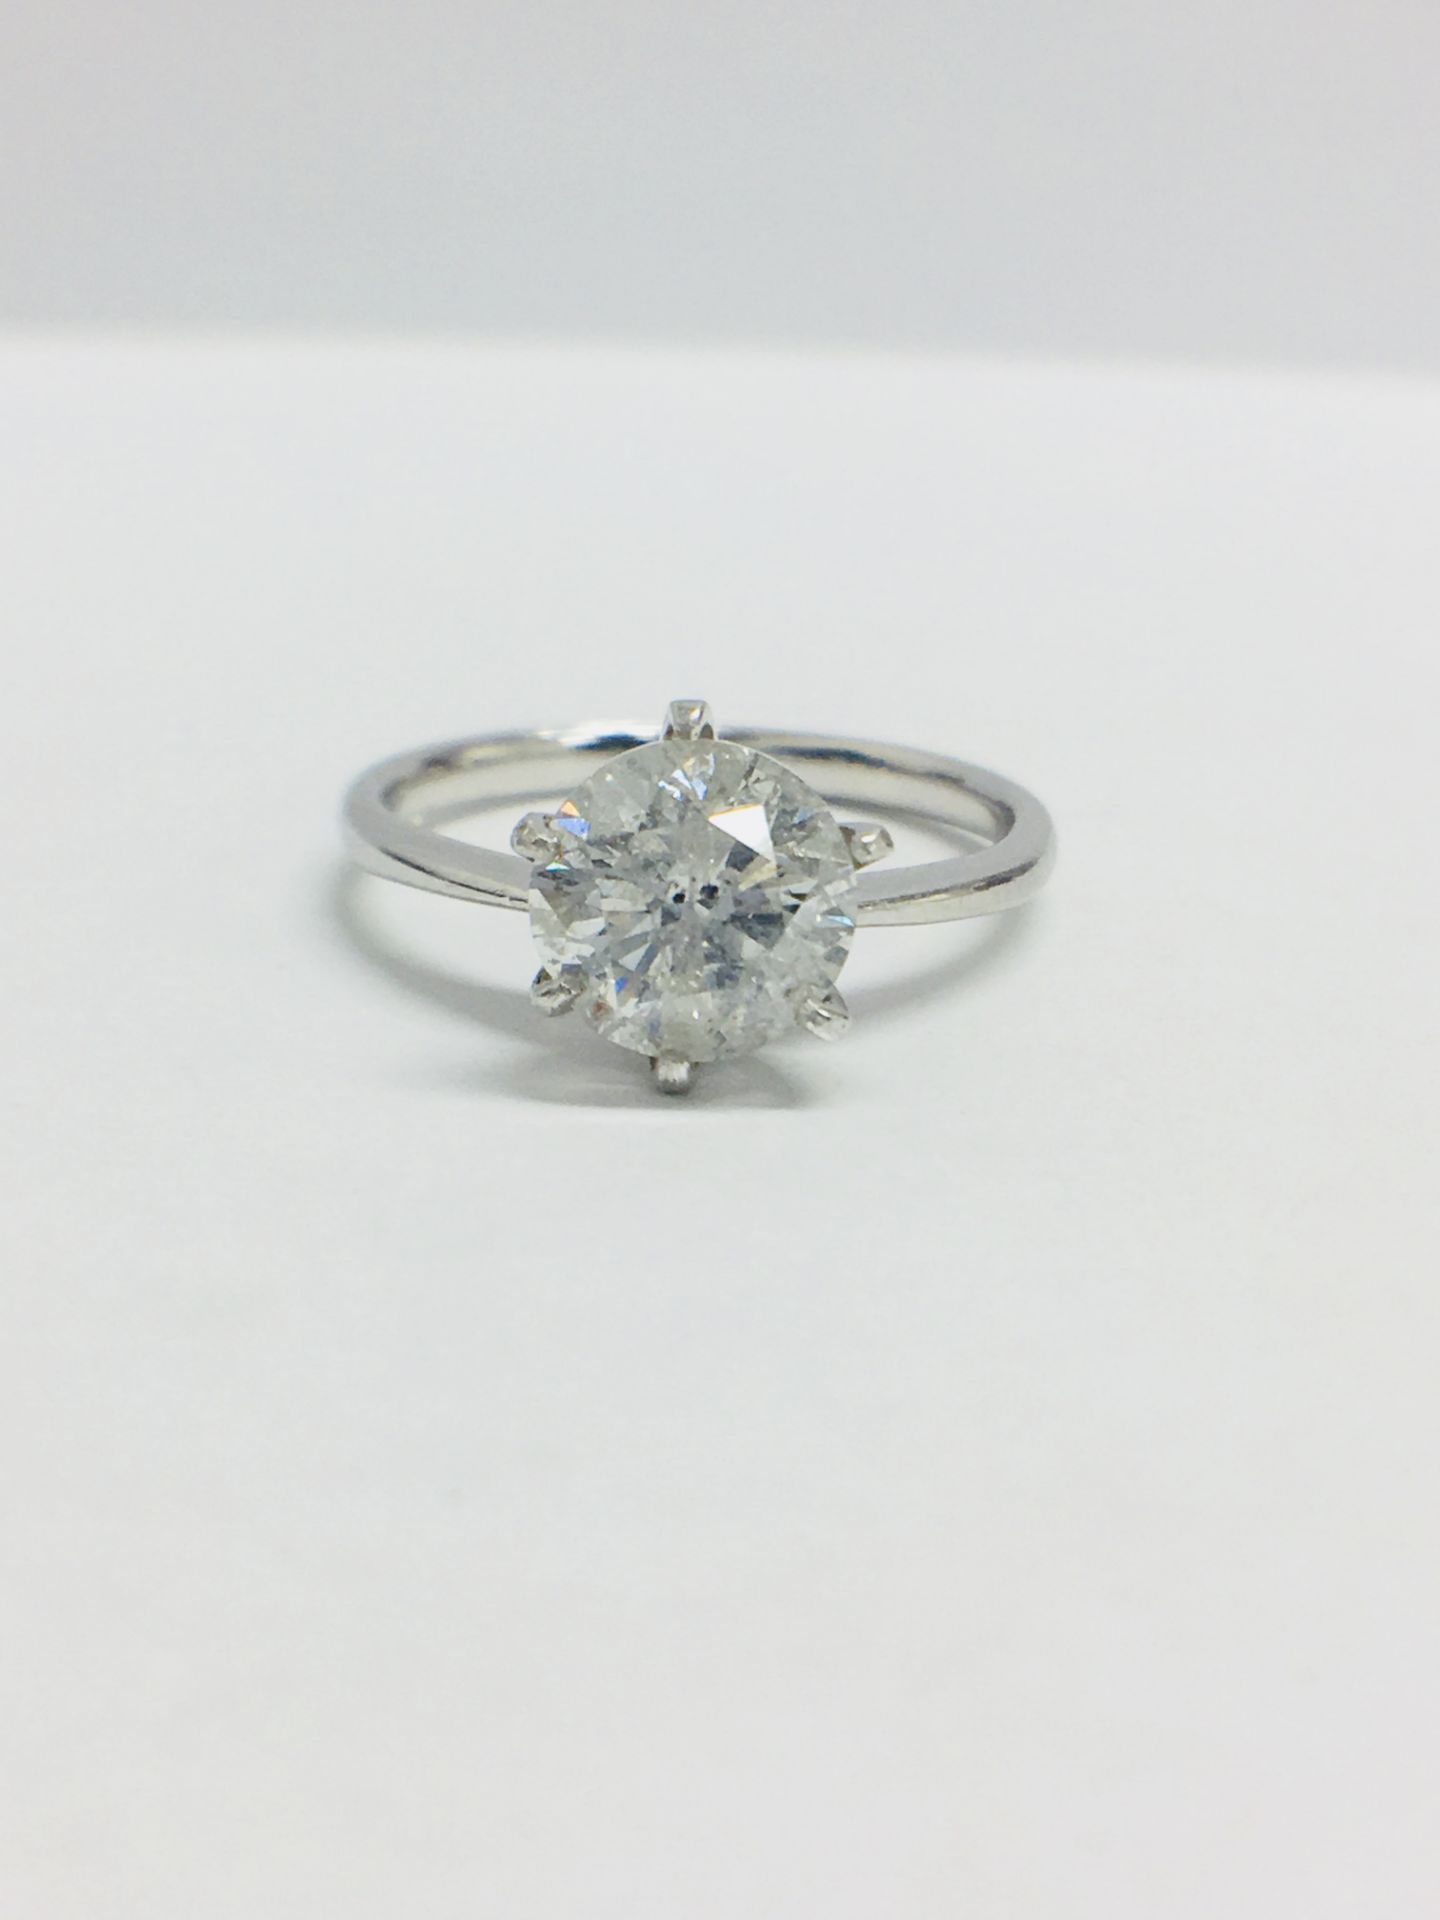 1.73ct diamond solitaire ring set in platinum. I colour and I1 clarity. 4 claw setting. Ring size M. - Image 6 of 6